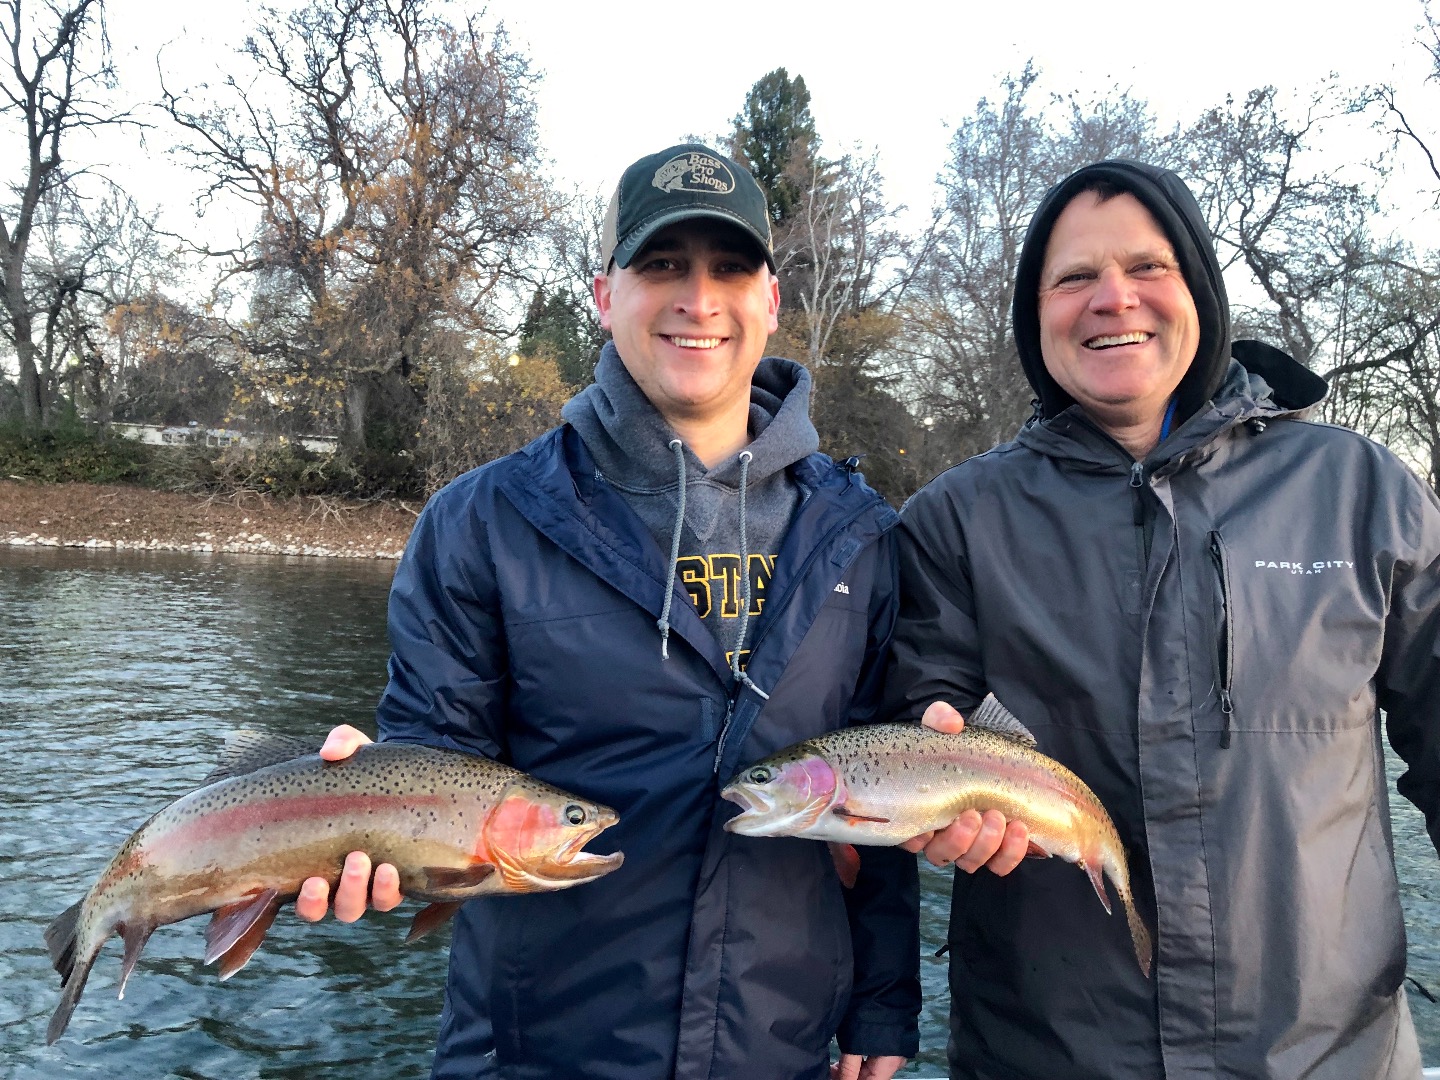 Excellent Redding rainbow fishing continues!